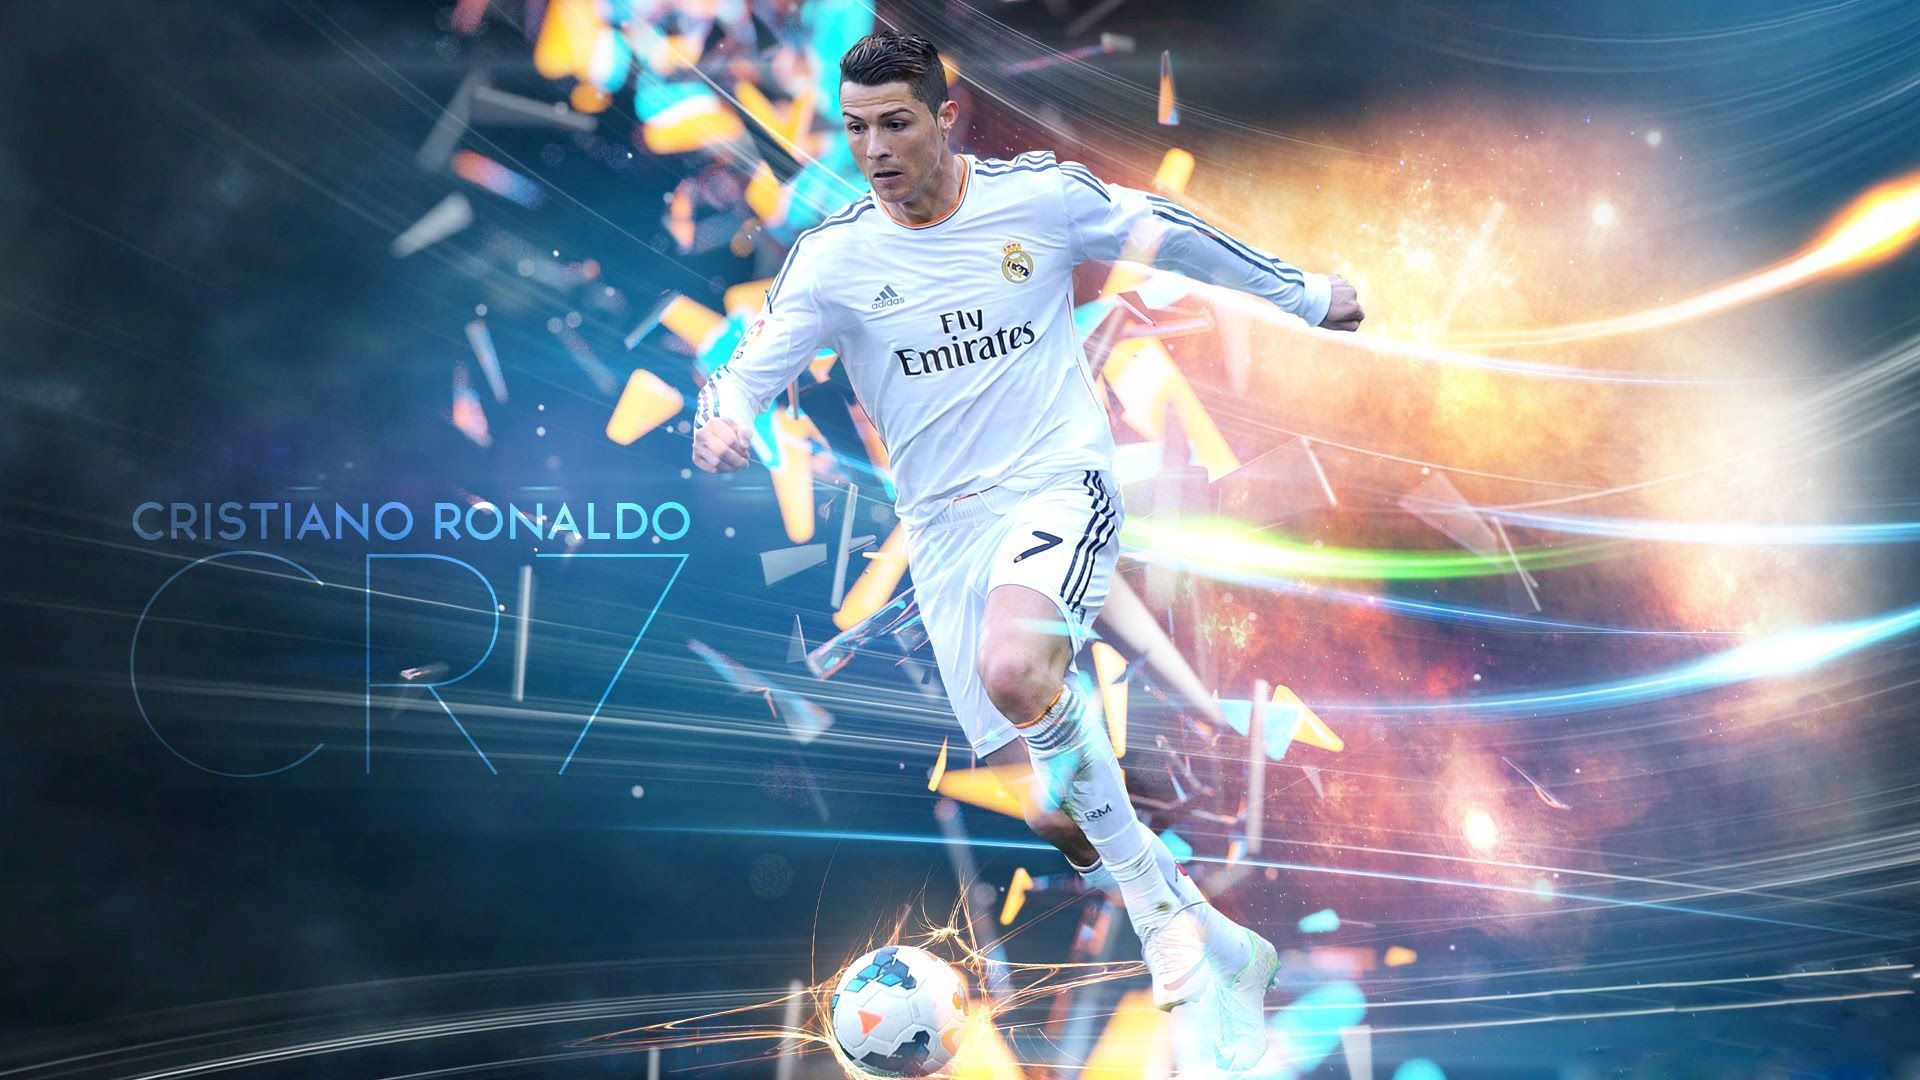 Free download Cristiano Ronaldo Full HD Wallpaper [1920x1080] Real madrid [ 1920x1080] for your Desktop, Mobile & Tablet. Explore Cristiano Ronaldo UHD Wallpaper. Cristiano Ronaldo HD Wallpaper, Wallpaper Of Cristiano